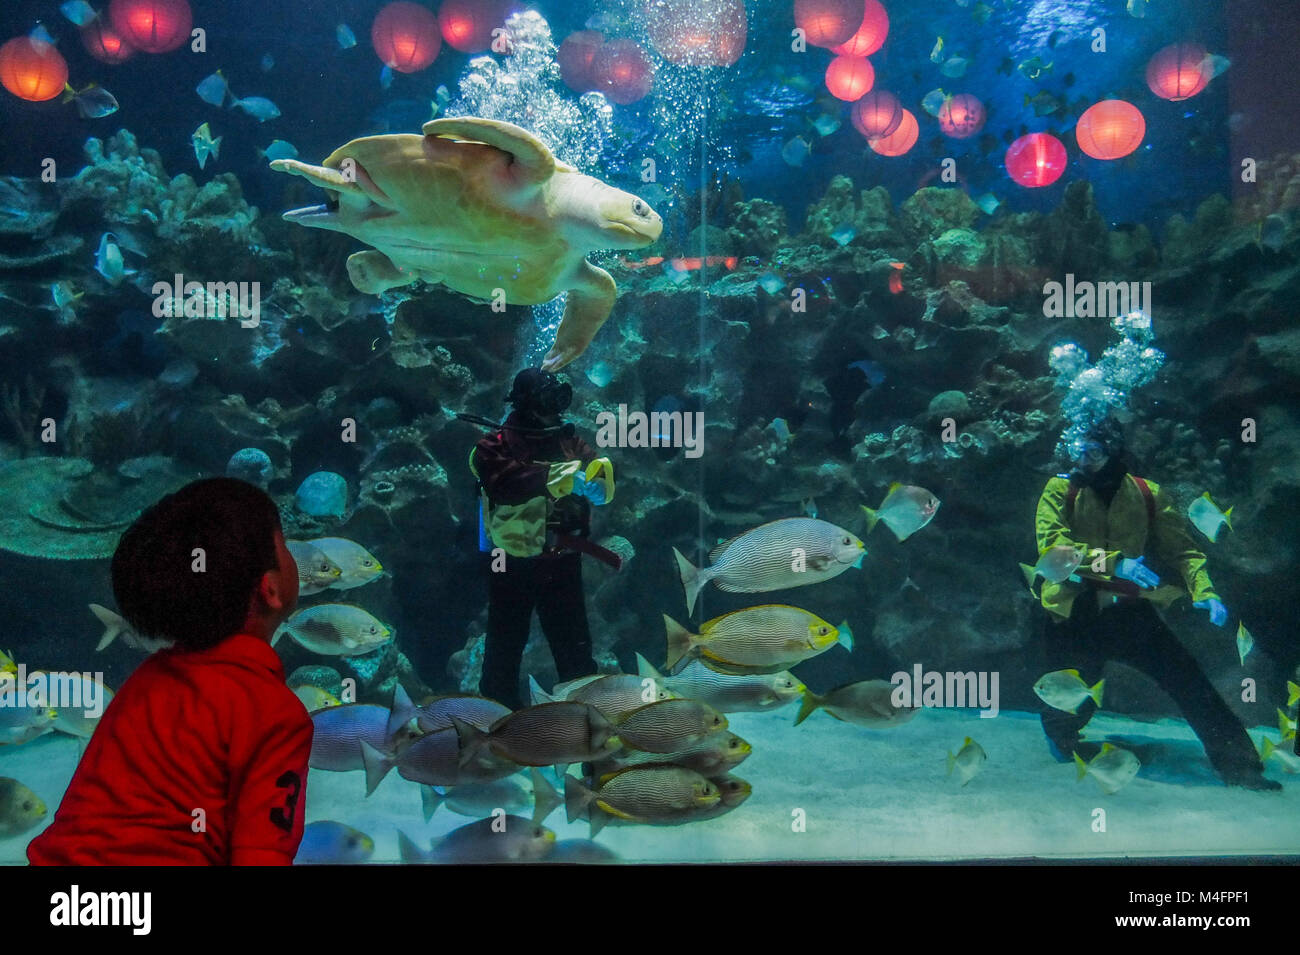 Kuala Lumpur, Malaysia. 16th Feb, 2018. A children watch a Kung Fu performances by professional diver inside the Aquaria KLCC during Chinese New Year celebration in Kuala Lumpur on February 16, 2018. The Chinese Lunar New Year on February 16 will welcome the Year of the dog (also known as the Year of the Earth Dog). Credit: Samsul Said/AFLO/Alamy Live News Stock Photo